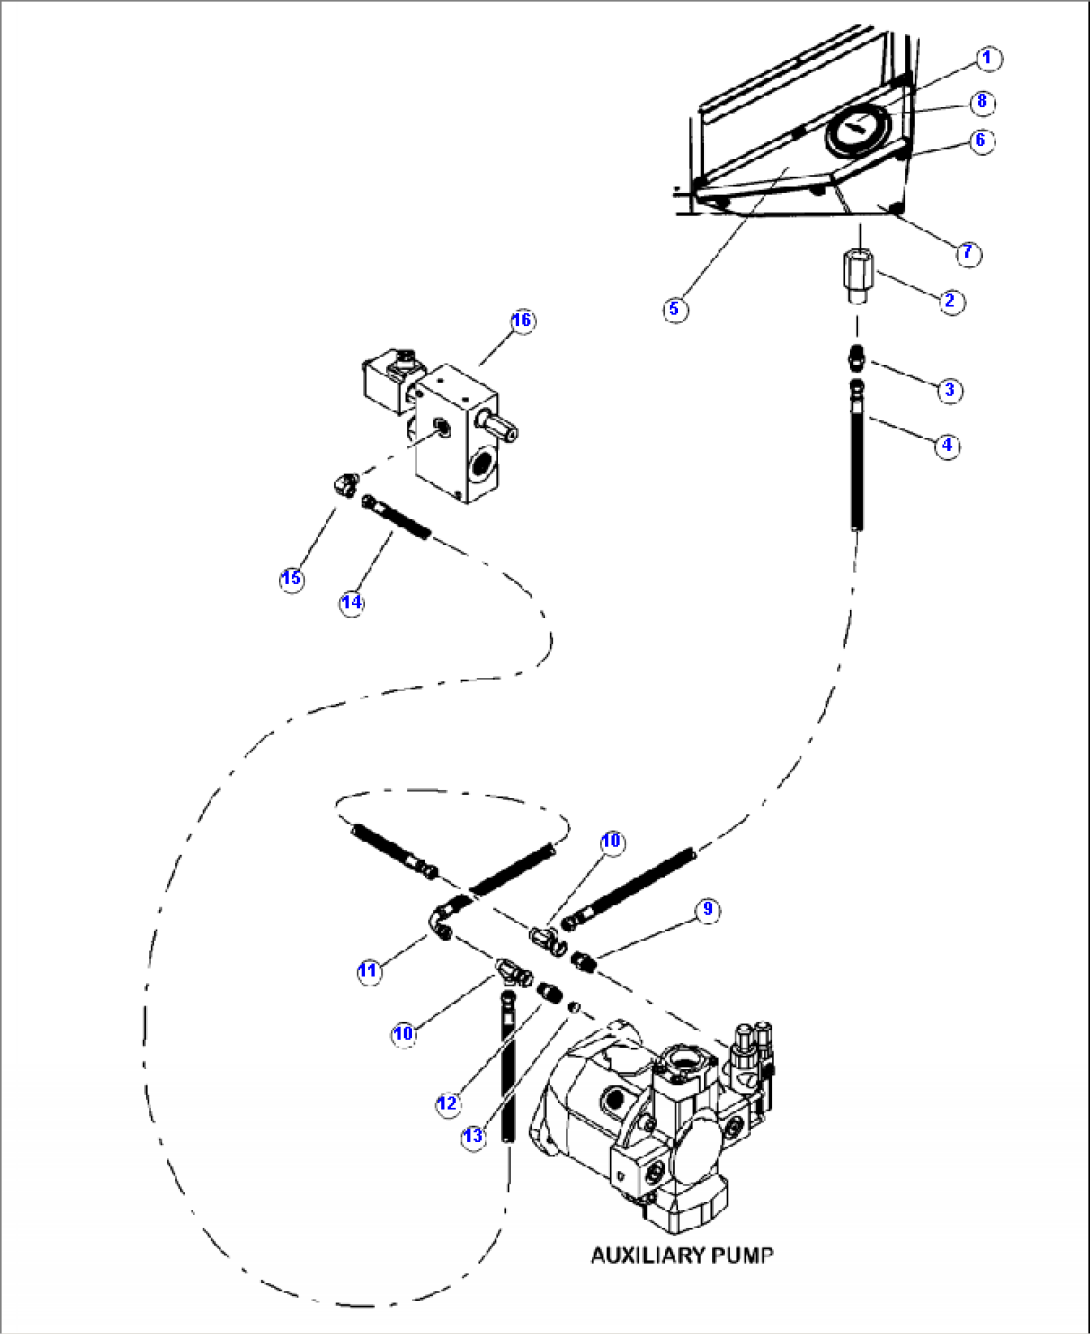 H5000-01A0 AUXILIARY PUMP COMPENSATOR AND GAUGE LINES